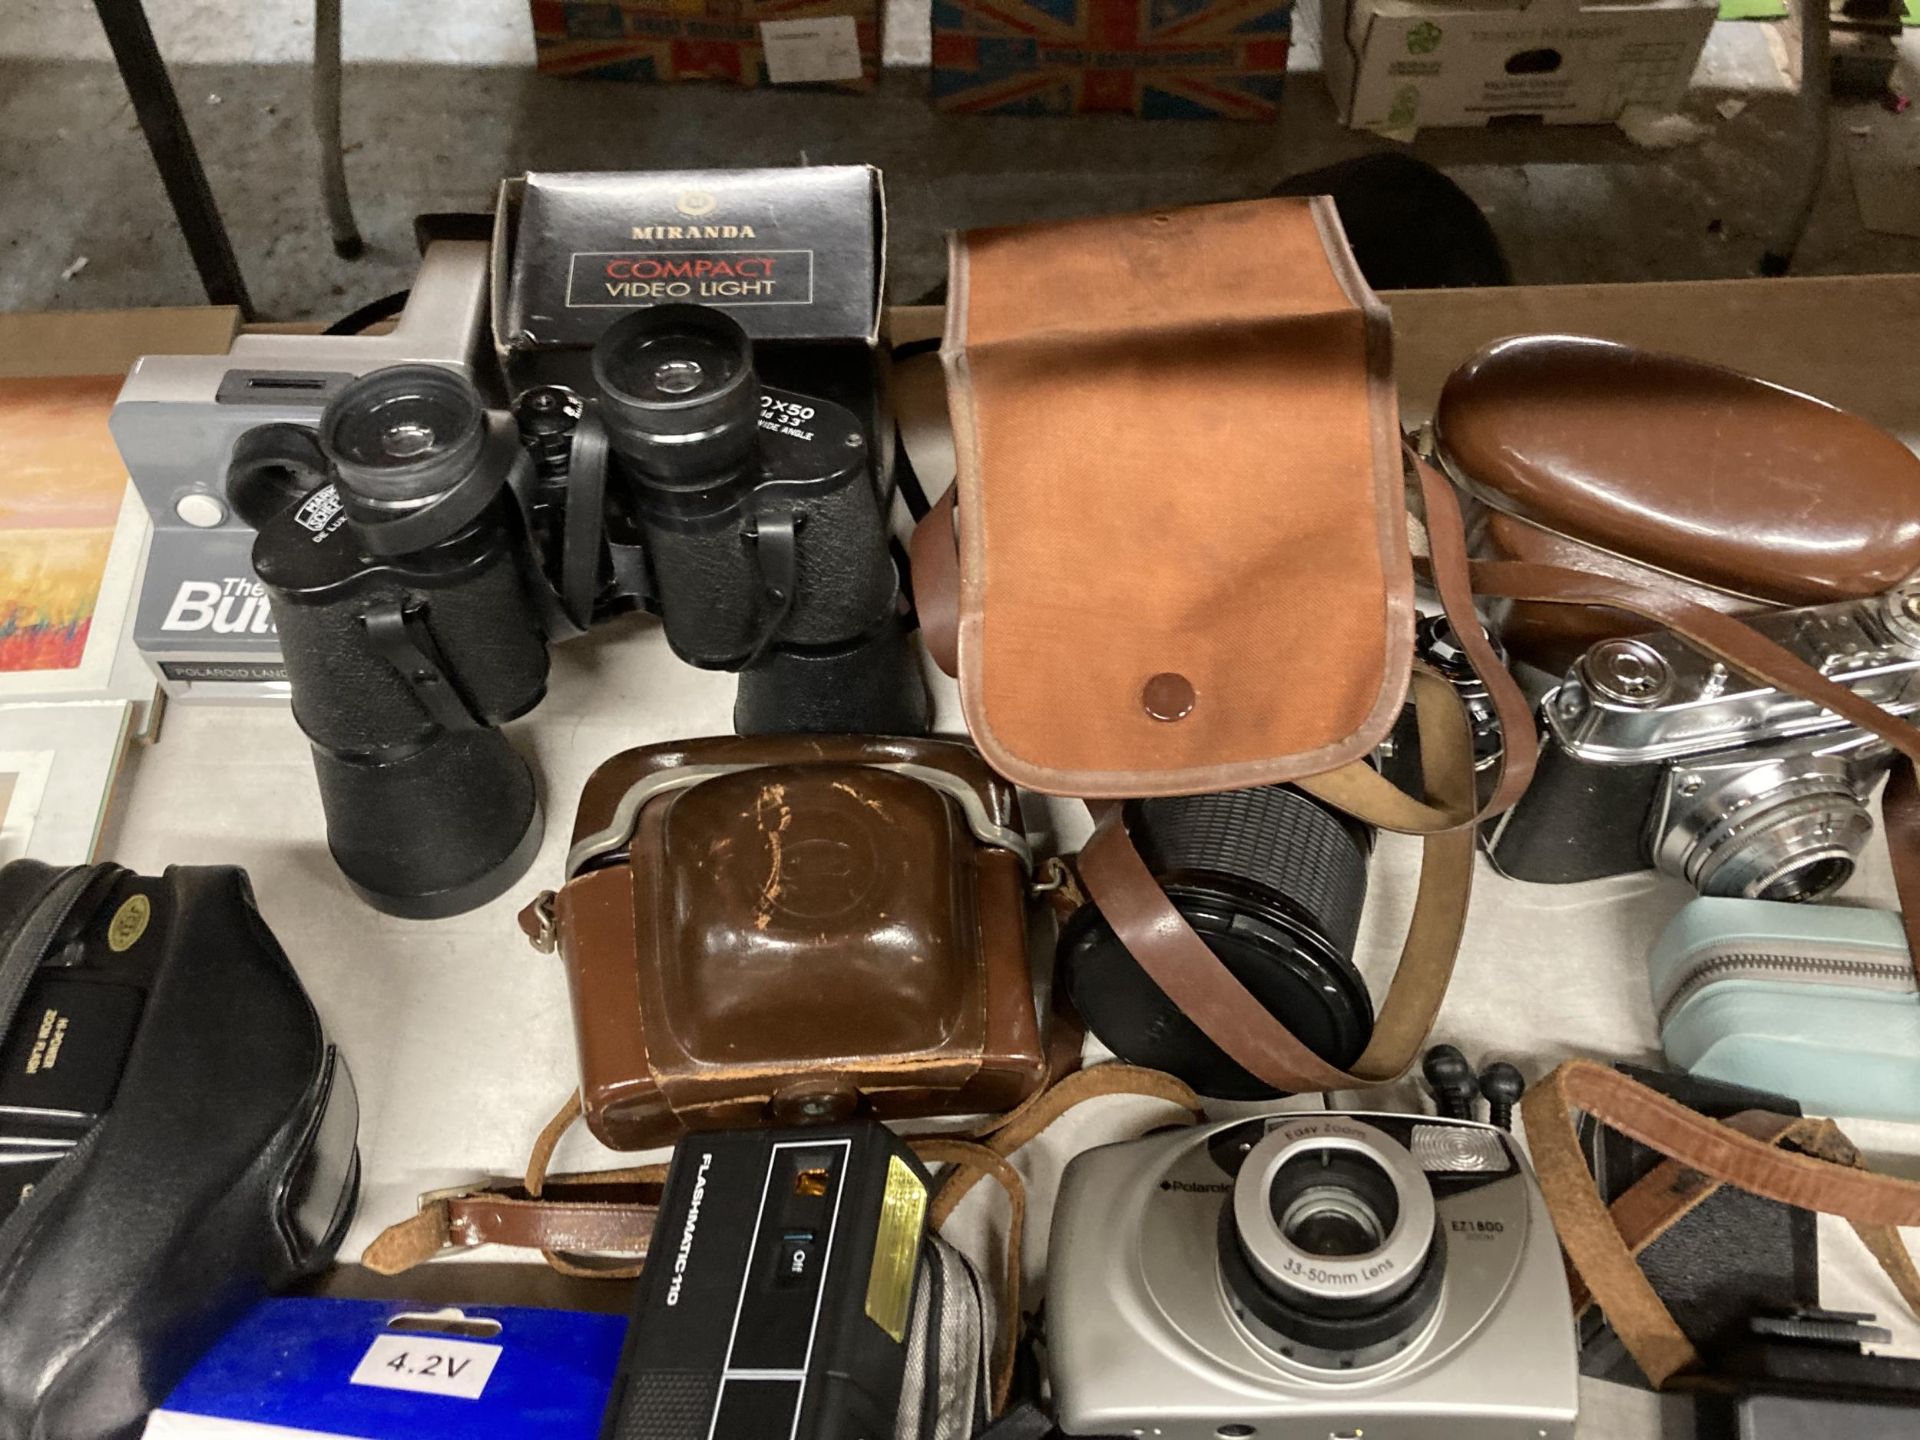 A COLLECTION OF VINTAGE CAMERAS TO INCLUDE HALINA PAULETTE ELECTRIC, KODAK, ADOX, POLAROID EZ1800 - Image 4 of 4